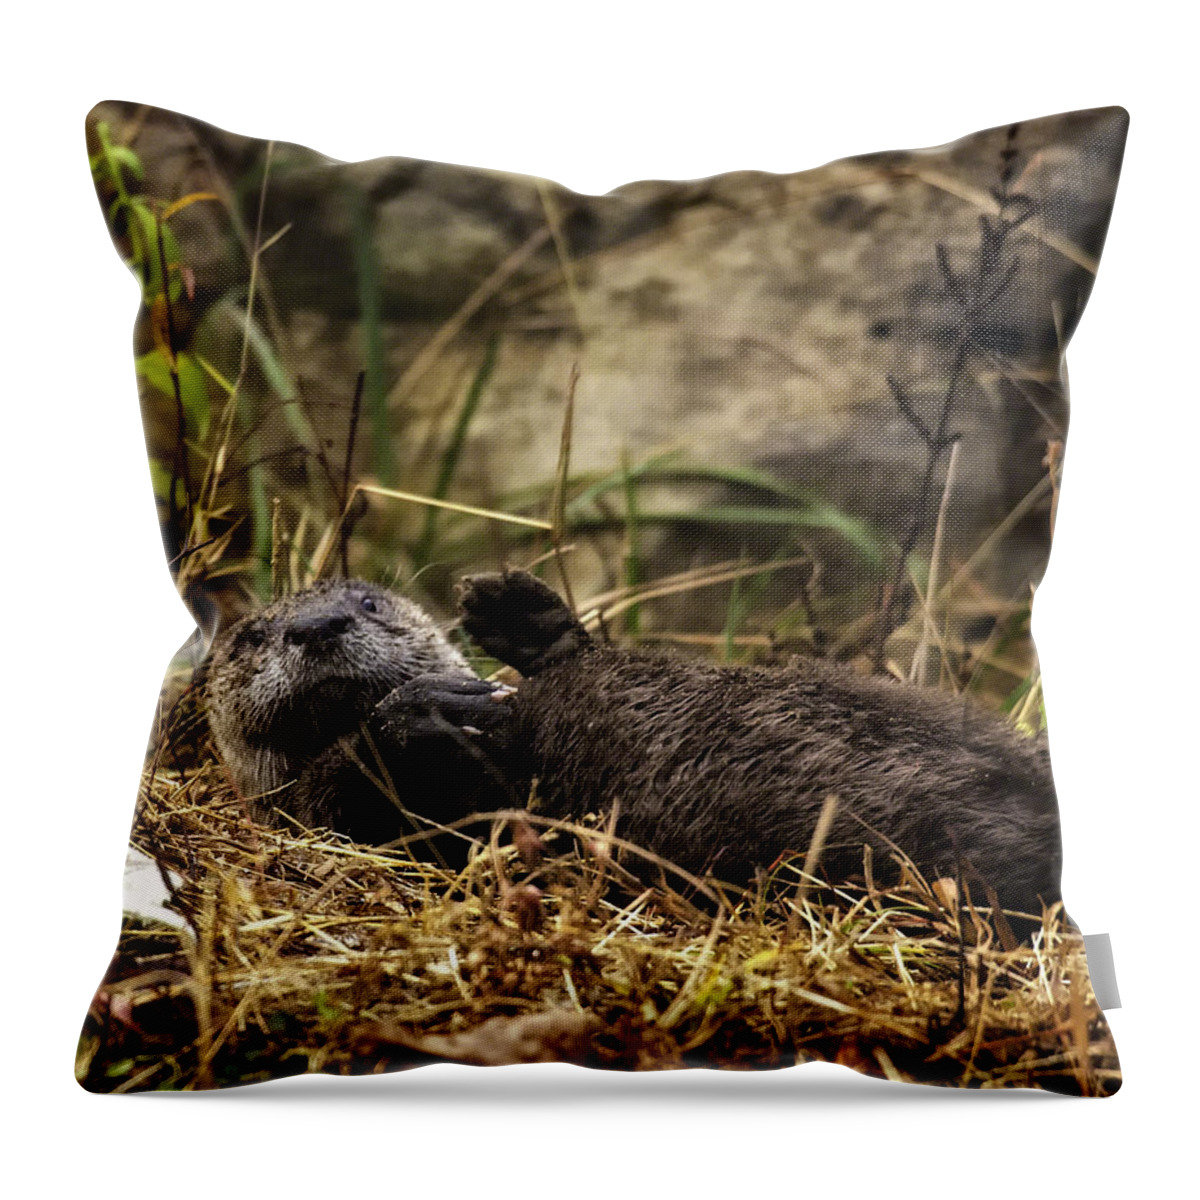 Otter Throw Pillow featuring the photograph Kickin' Back by Michael Dougherty